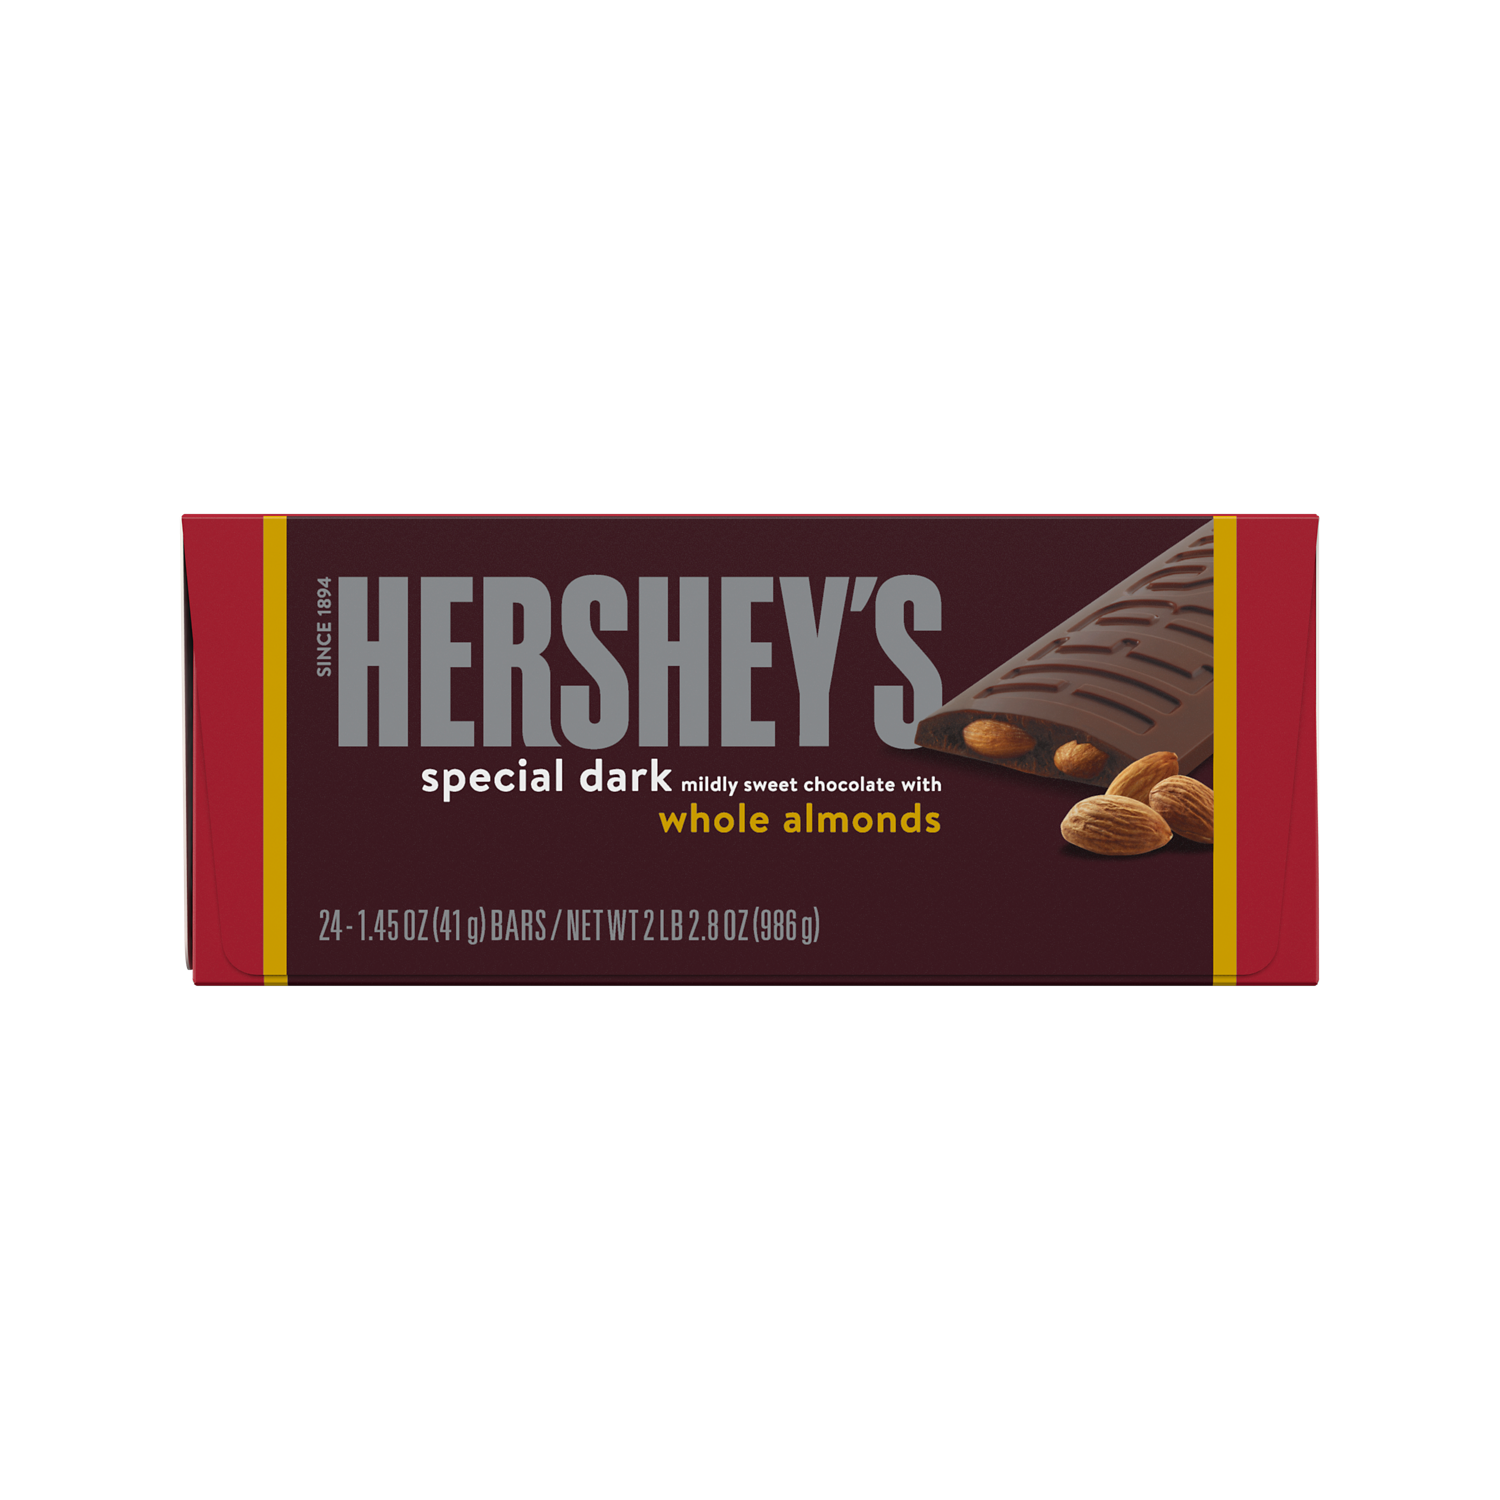 HERSHEY'S SPECIAL DARK Mildly Sweet Chocolate with Almonds Candy Bars, 1.45 oz box, 24 pack - Front of Package